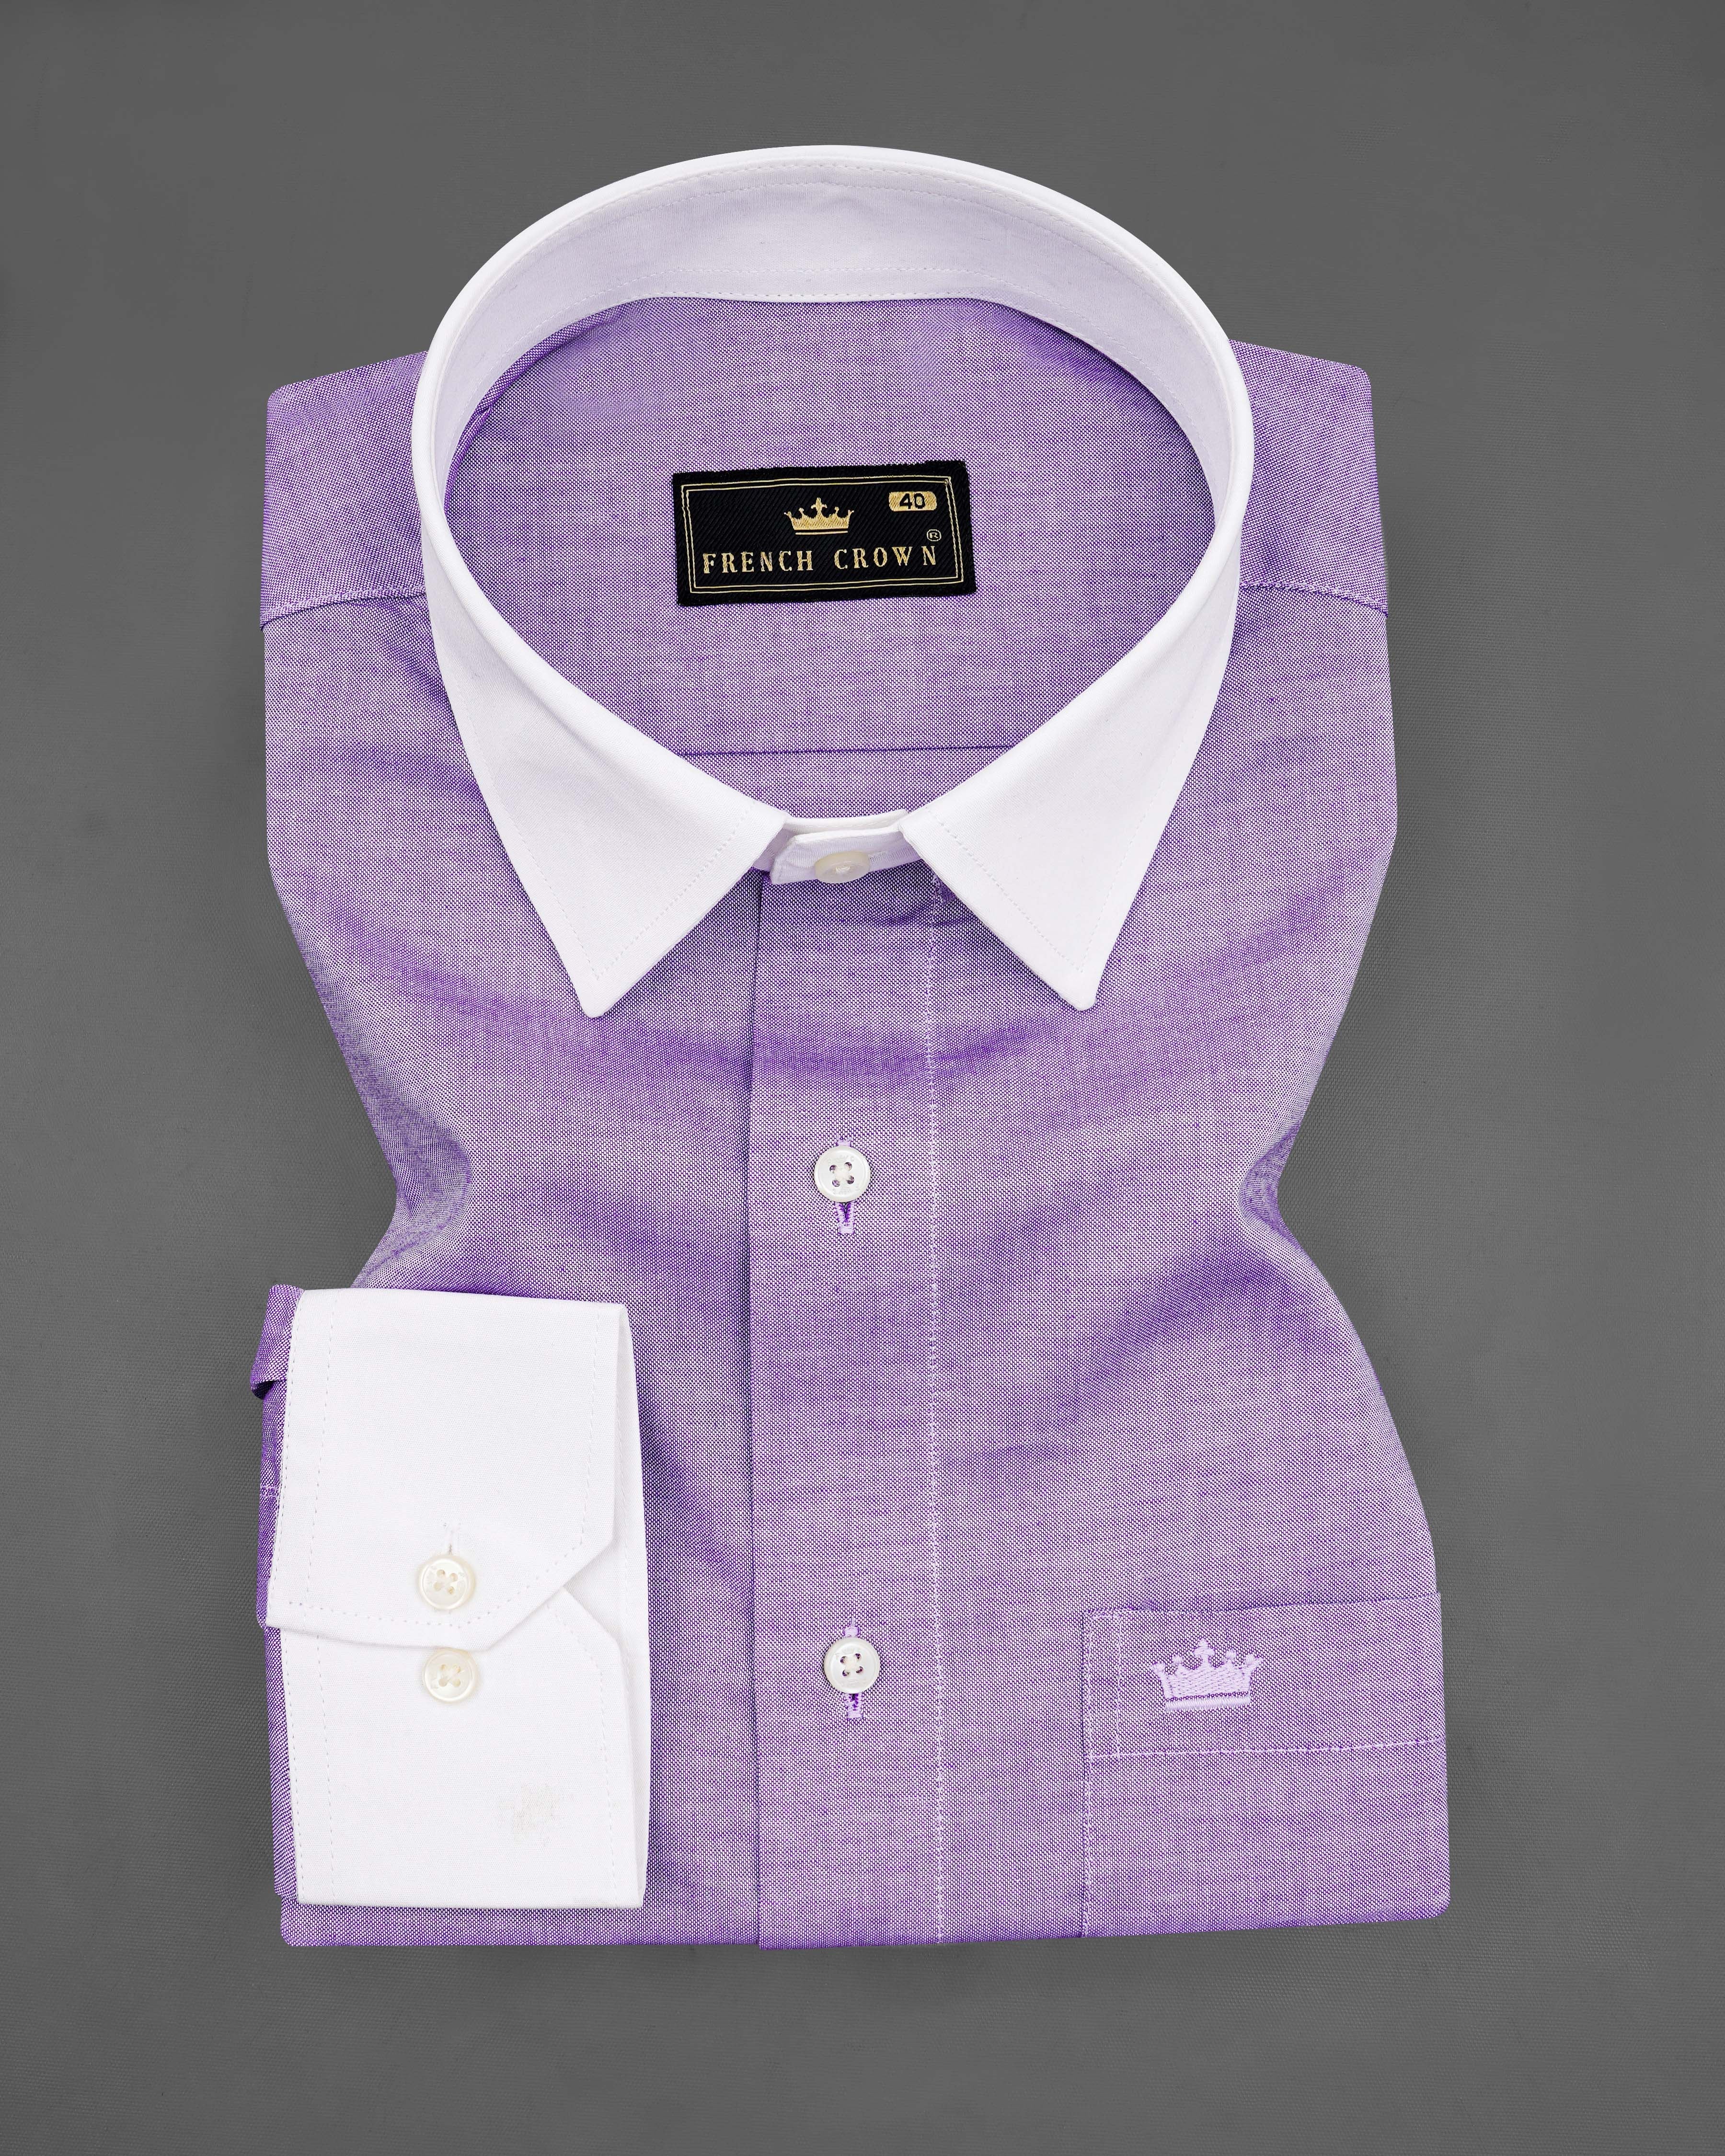 East Side Purple with White Collar and Cuffs Royal Oxford Shirt 8296-WCC -38,8296-WCC -H-38,8296-WCC -39,8296-WCC -H-39,8296-WCC -40,8296-WCC -H-40,8296-WCC -42,8296-WCC -H-42,8296-WCC -44,8296-WCC -H-44,8296-WCC -46,8296-WCC -H-46,8296-WCC -48,8296-WCC -H-48,8296-WCC -50,8296-WCC -H-50,8296-WCC -52,8296-WCC -H-52